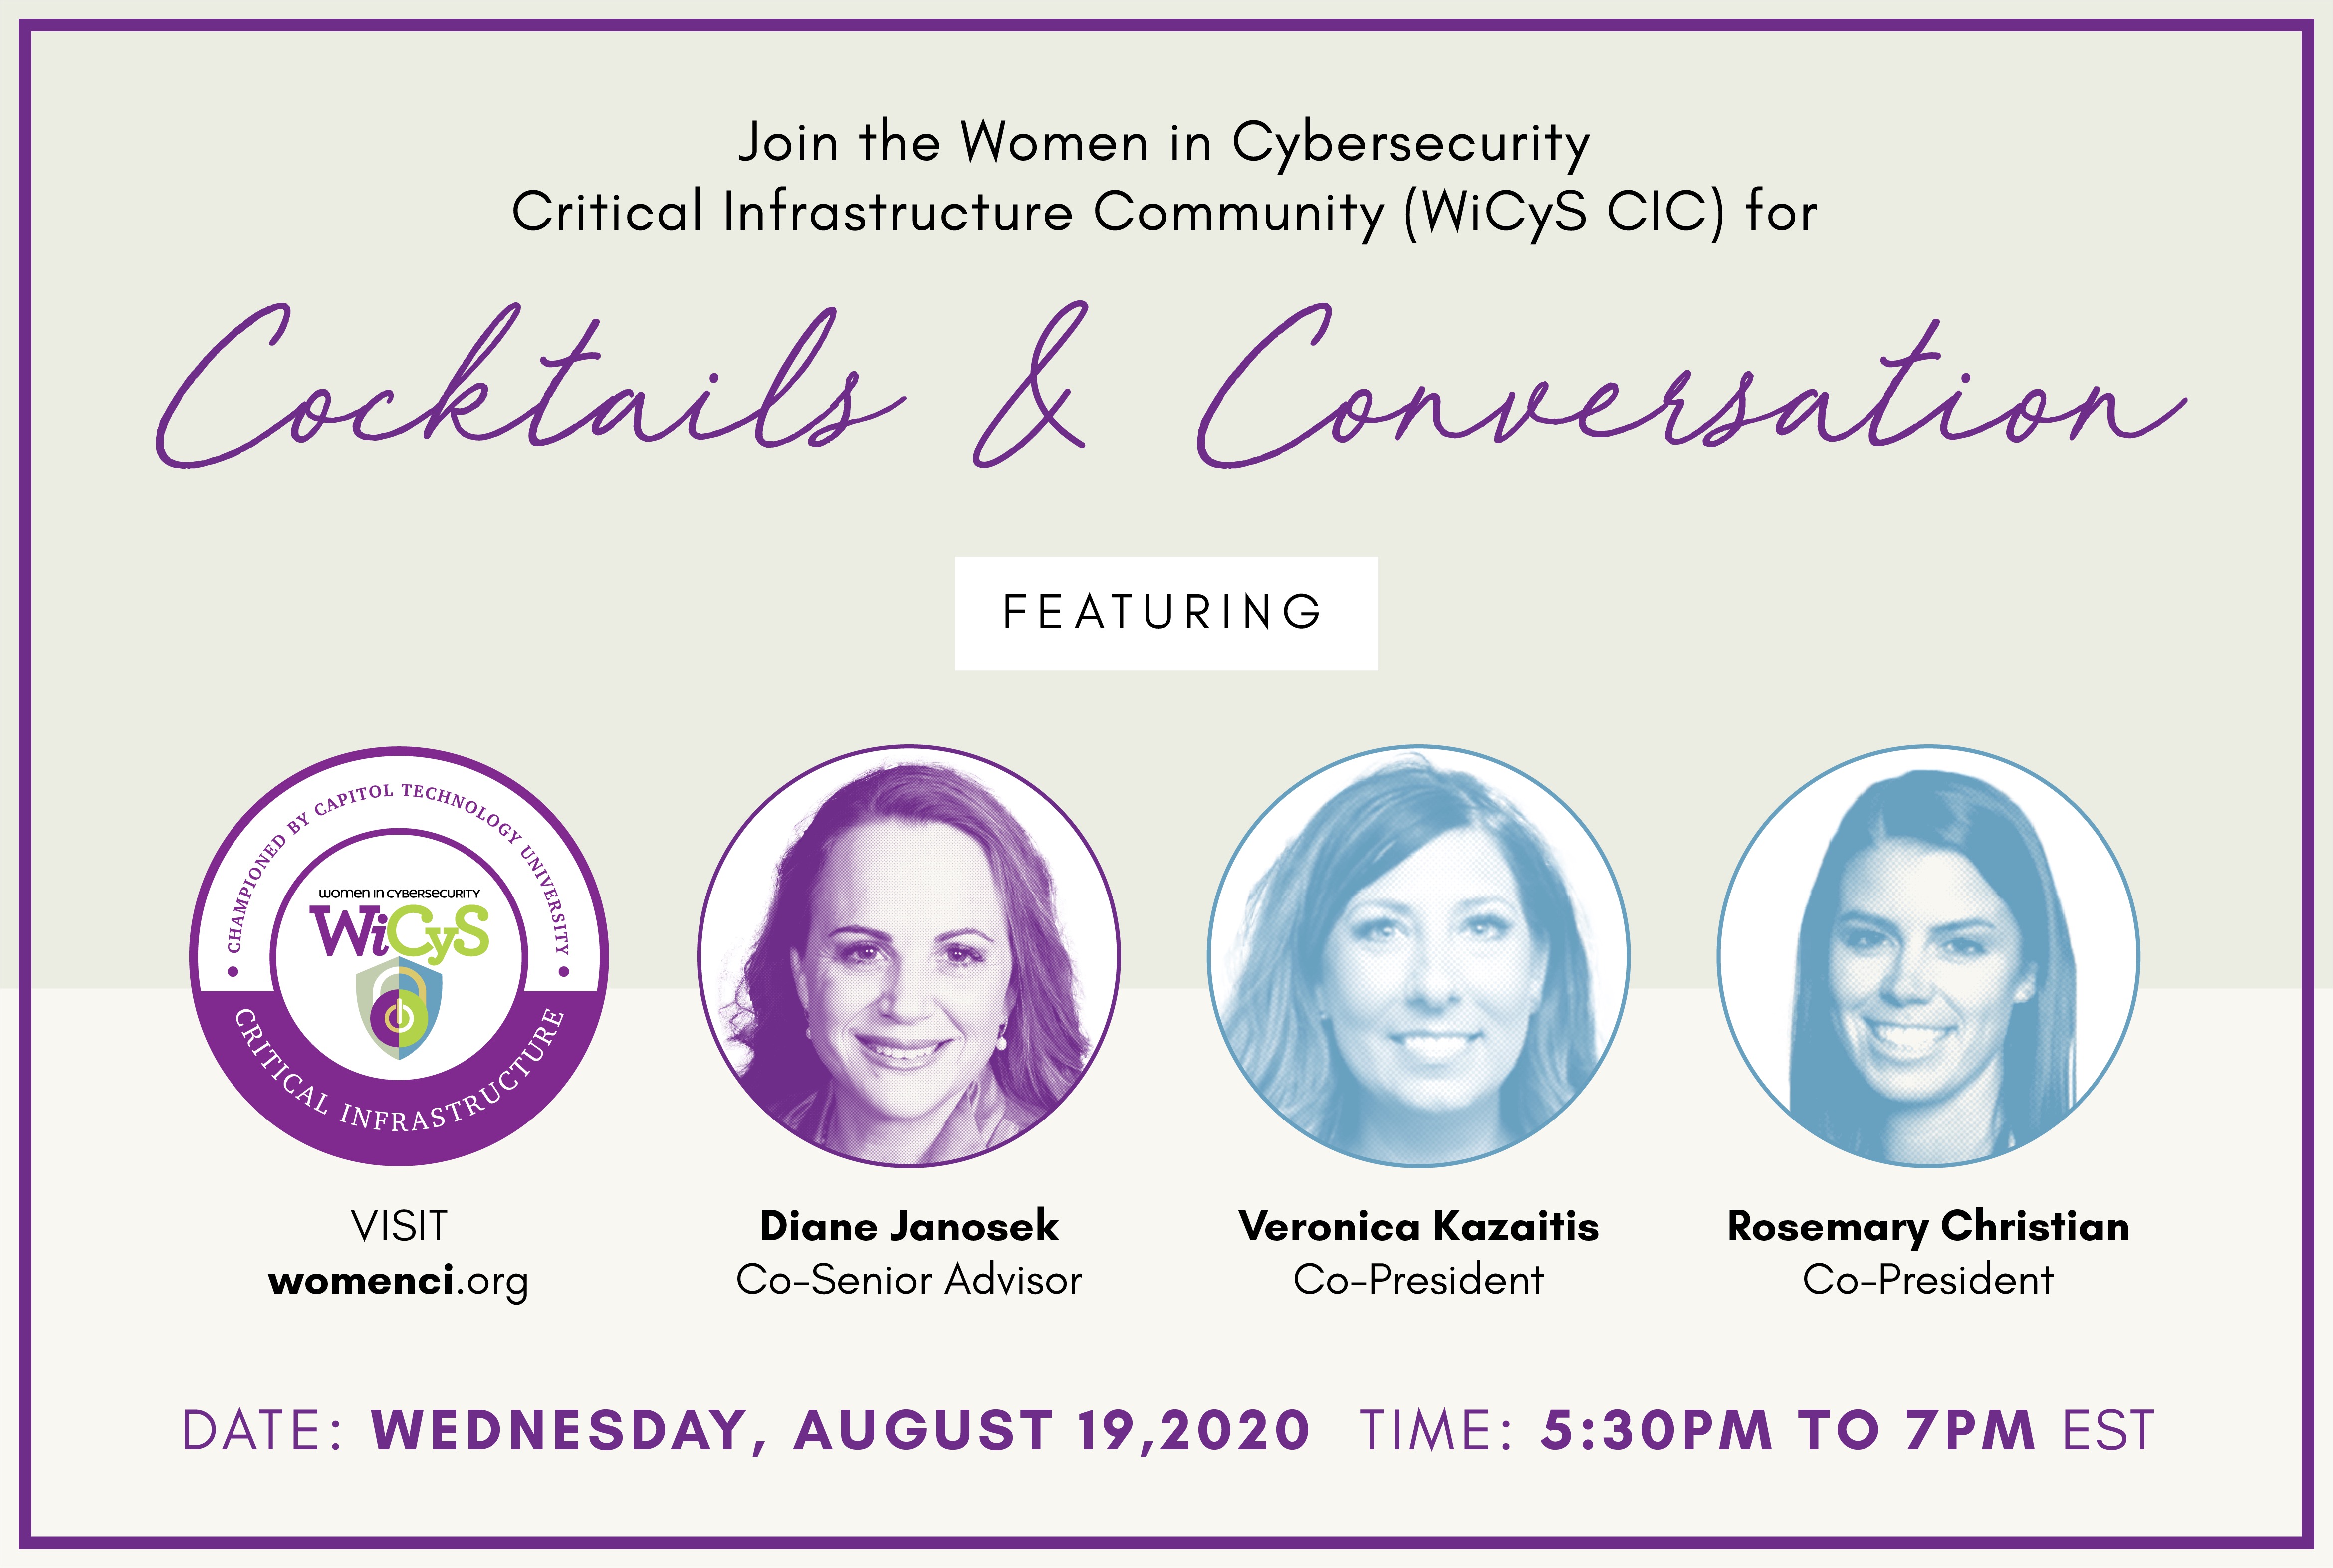 Women in Cybersecurity Critical Infrastructure